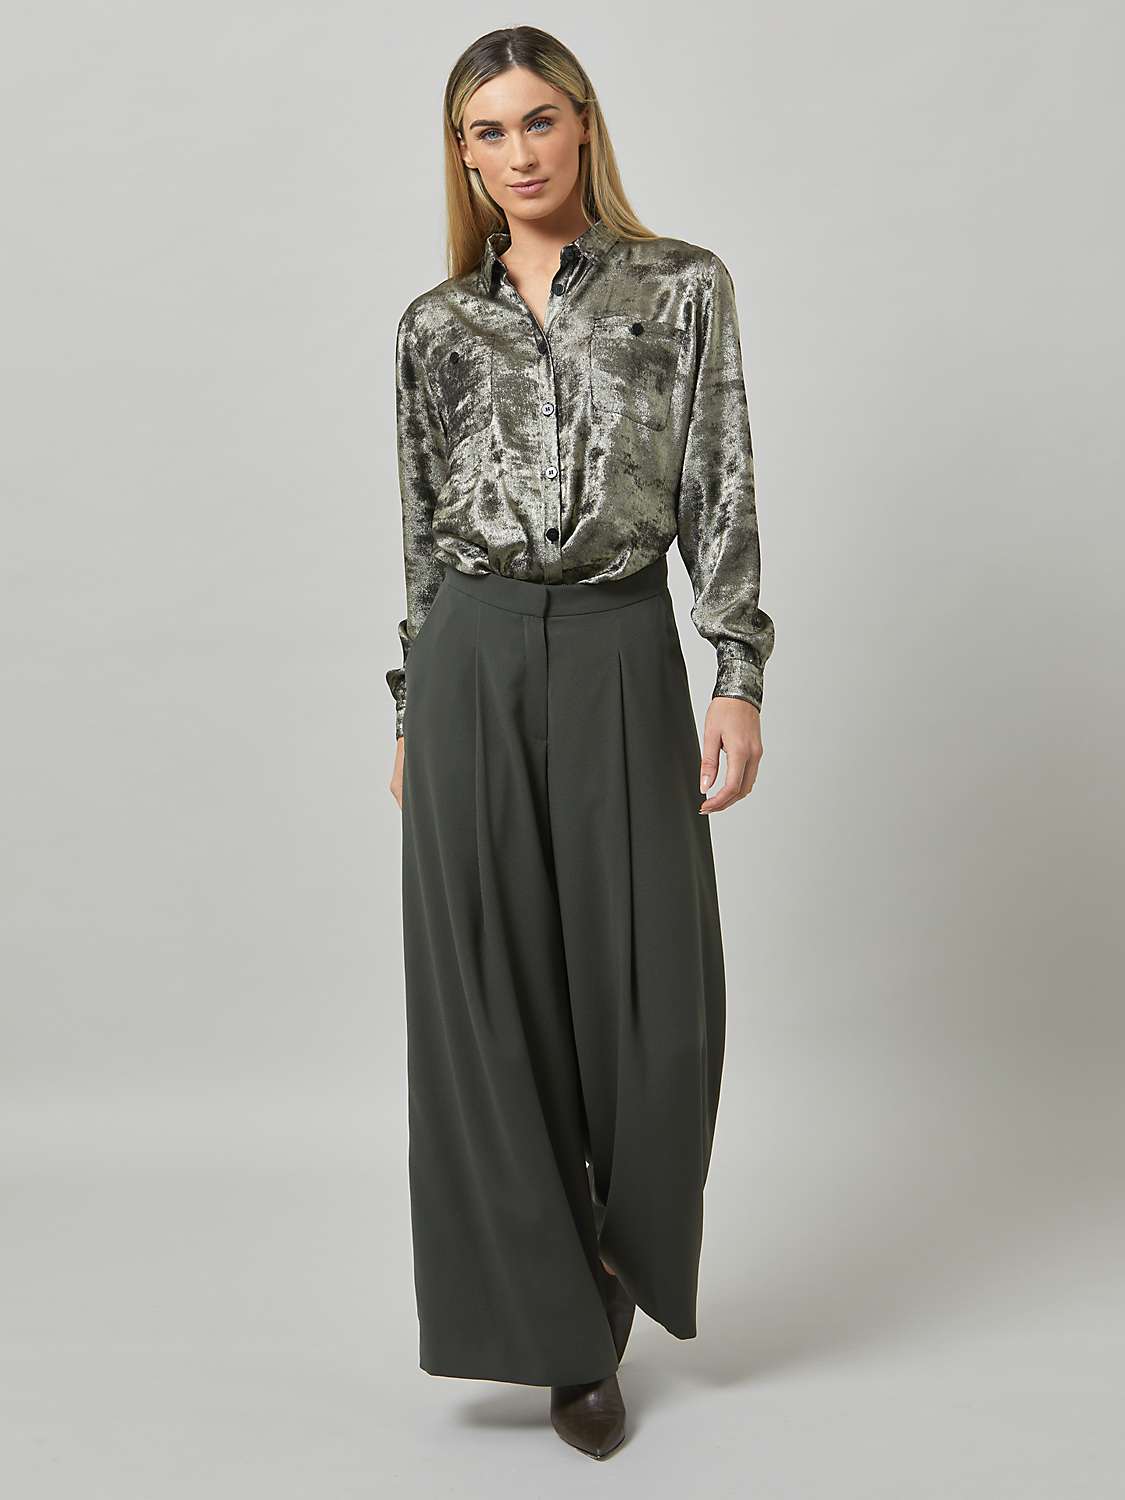 Buy Helen McAlinden Charlize Trousers Online at johnlewis.com